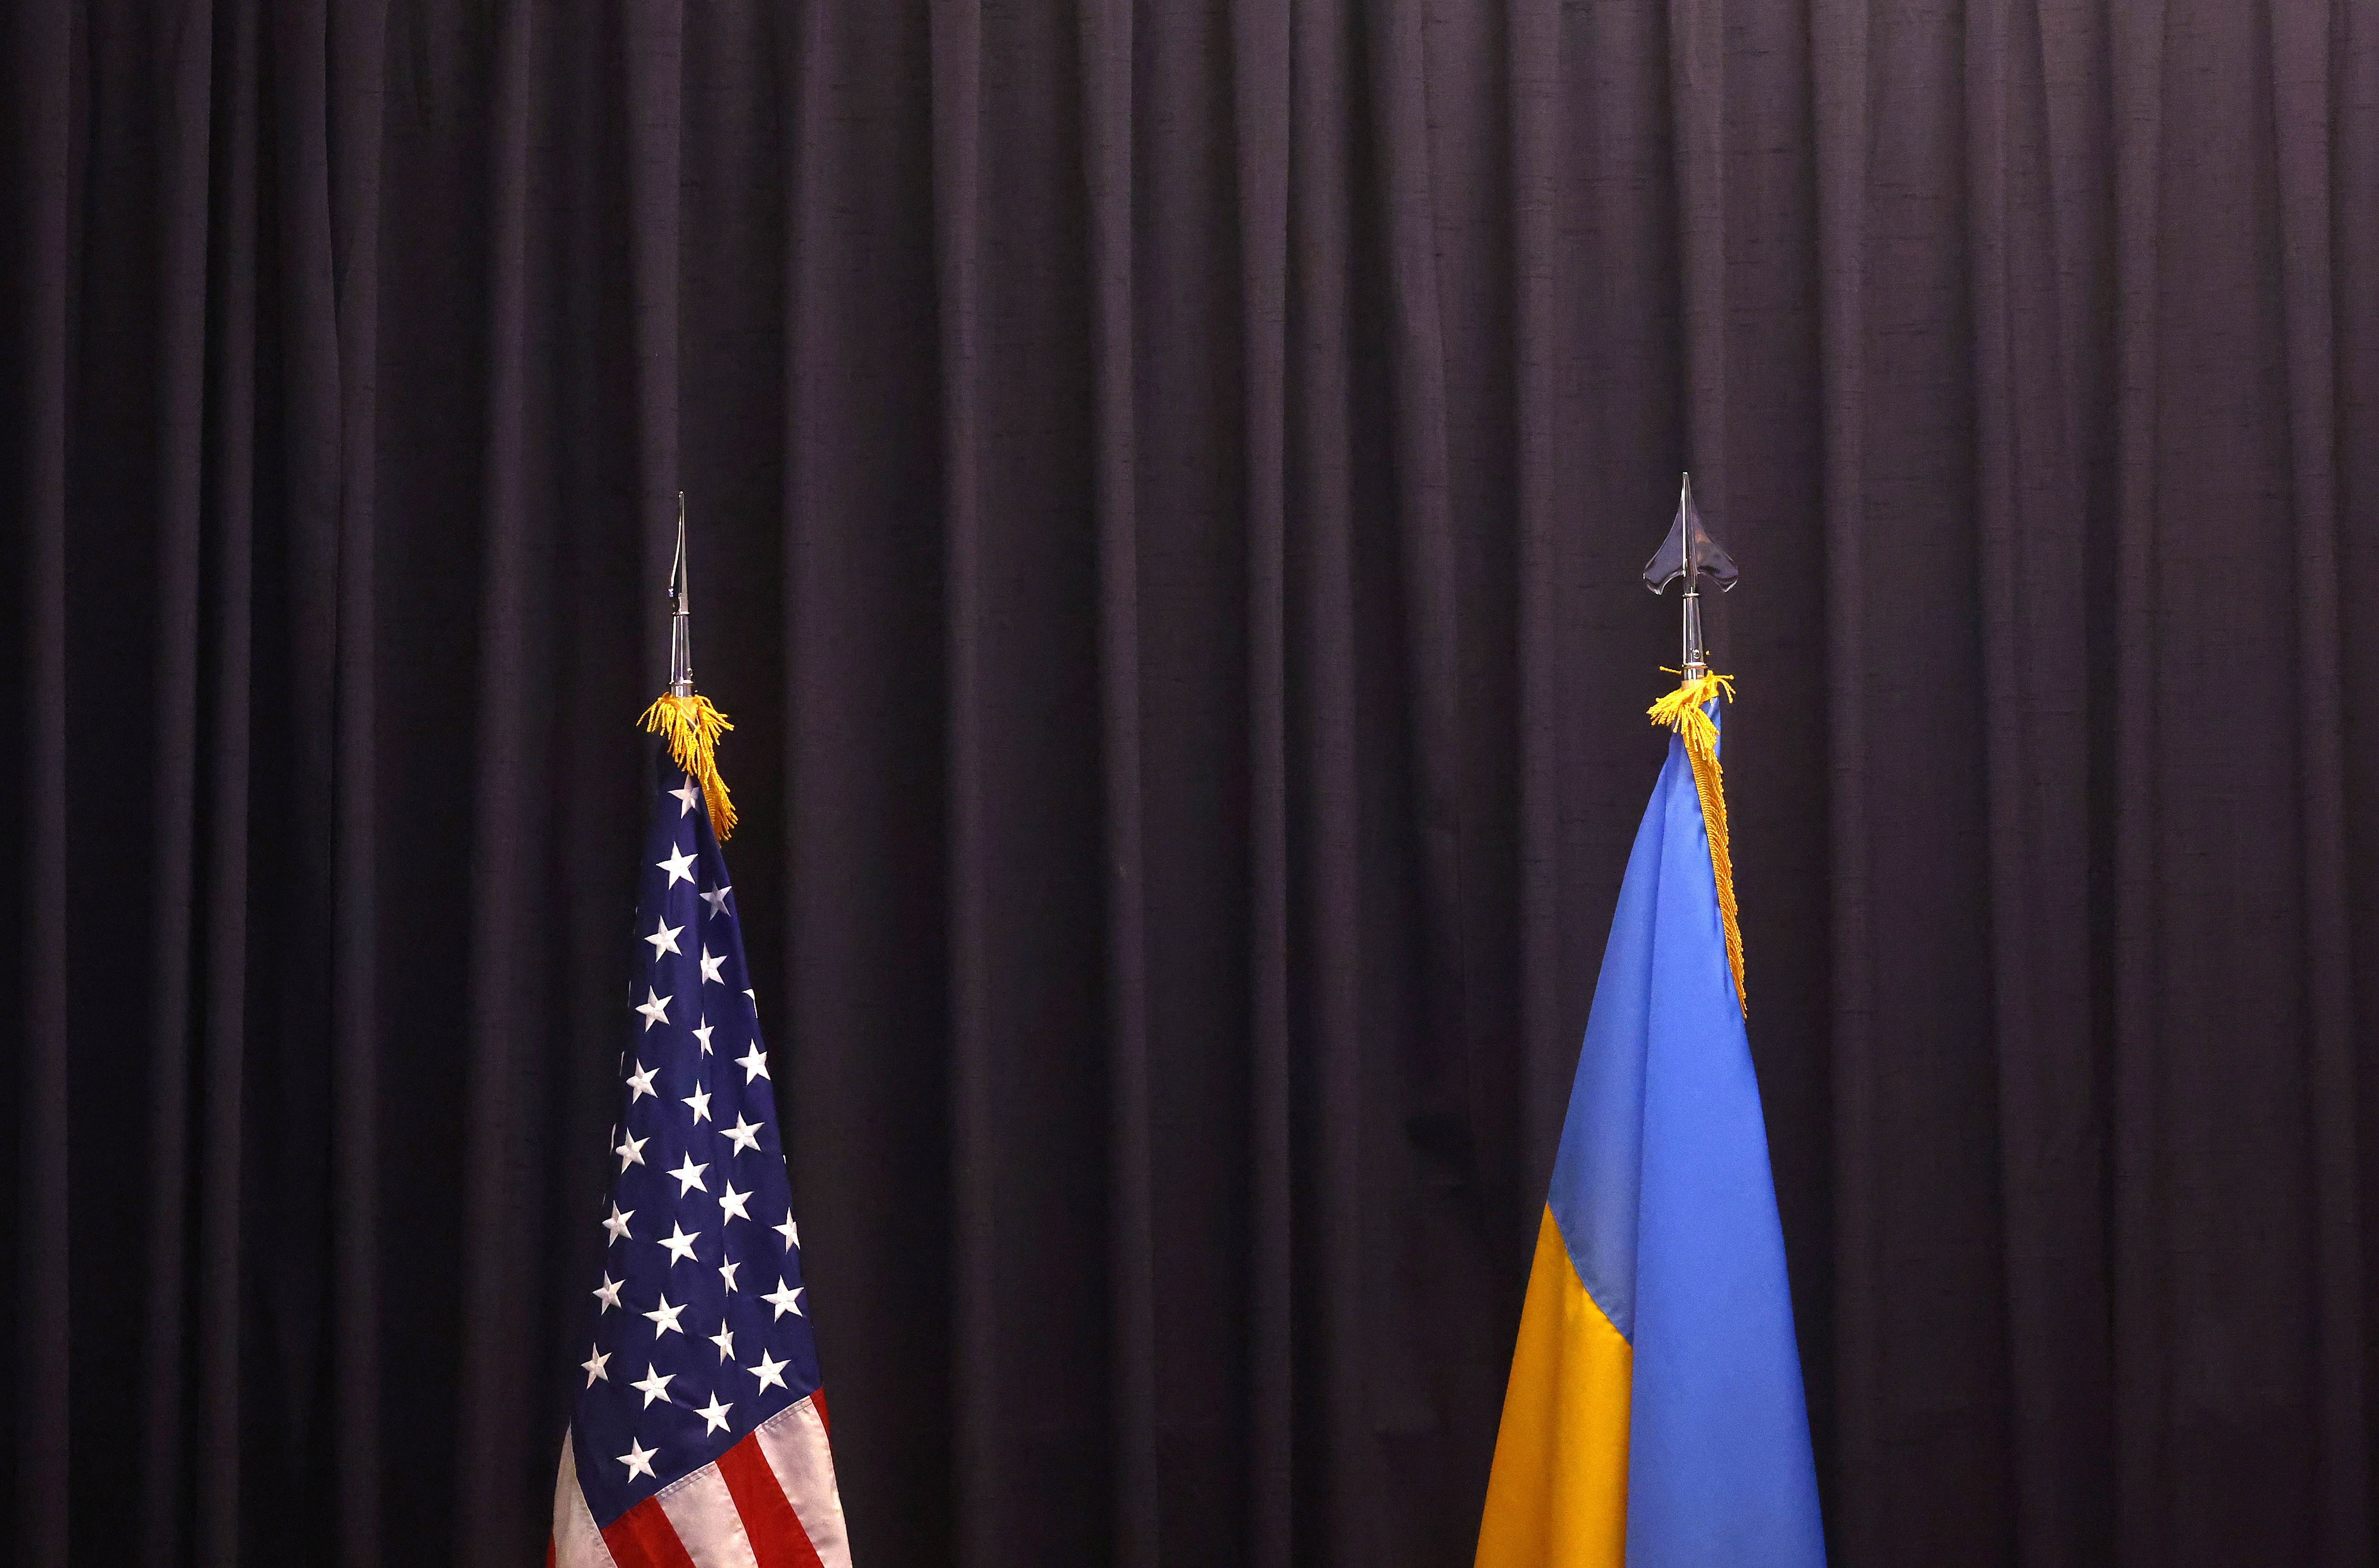 U.S. and Ukrainian flags are pictured prior to the start of the UUkraine Defense Consultative Group meeting hosted by U.S. Secretary of Defense Lloyd Austin in Ramstein